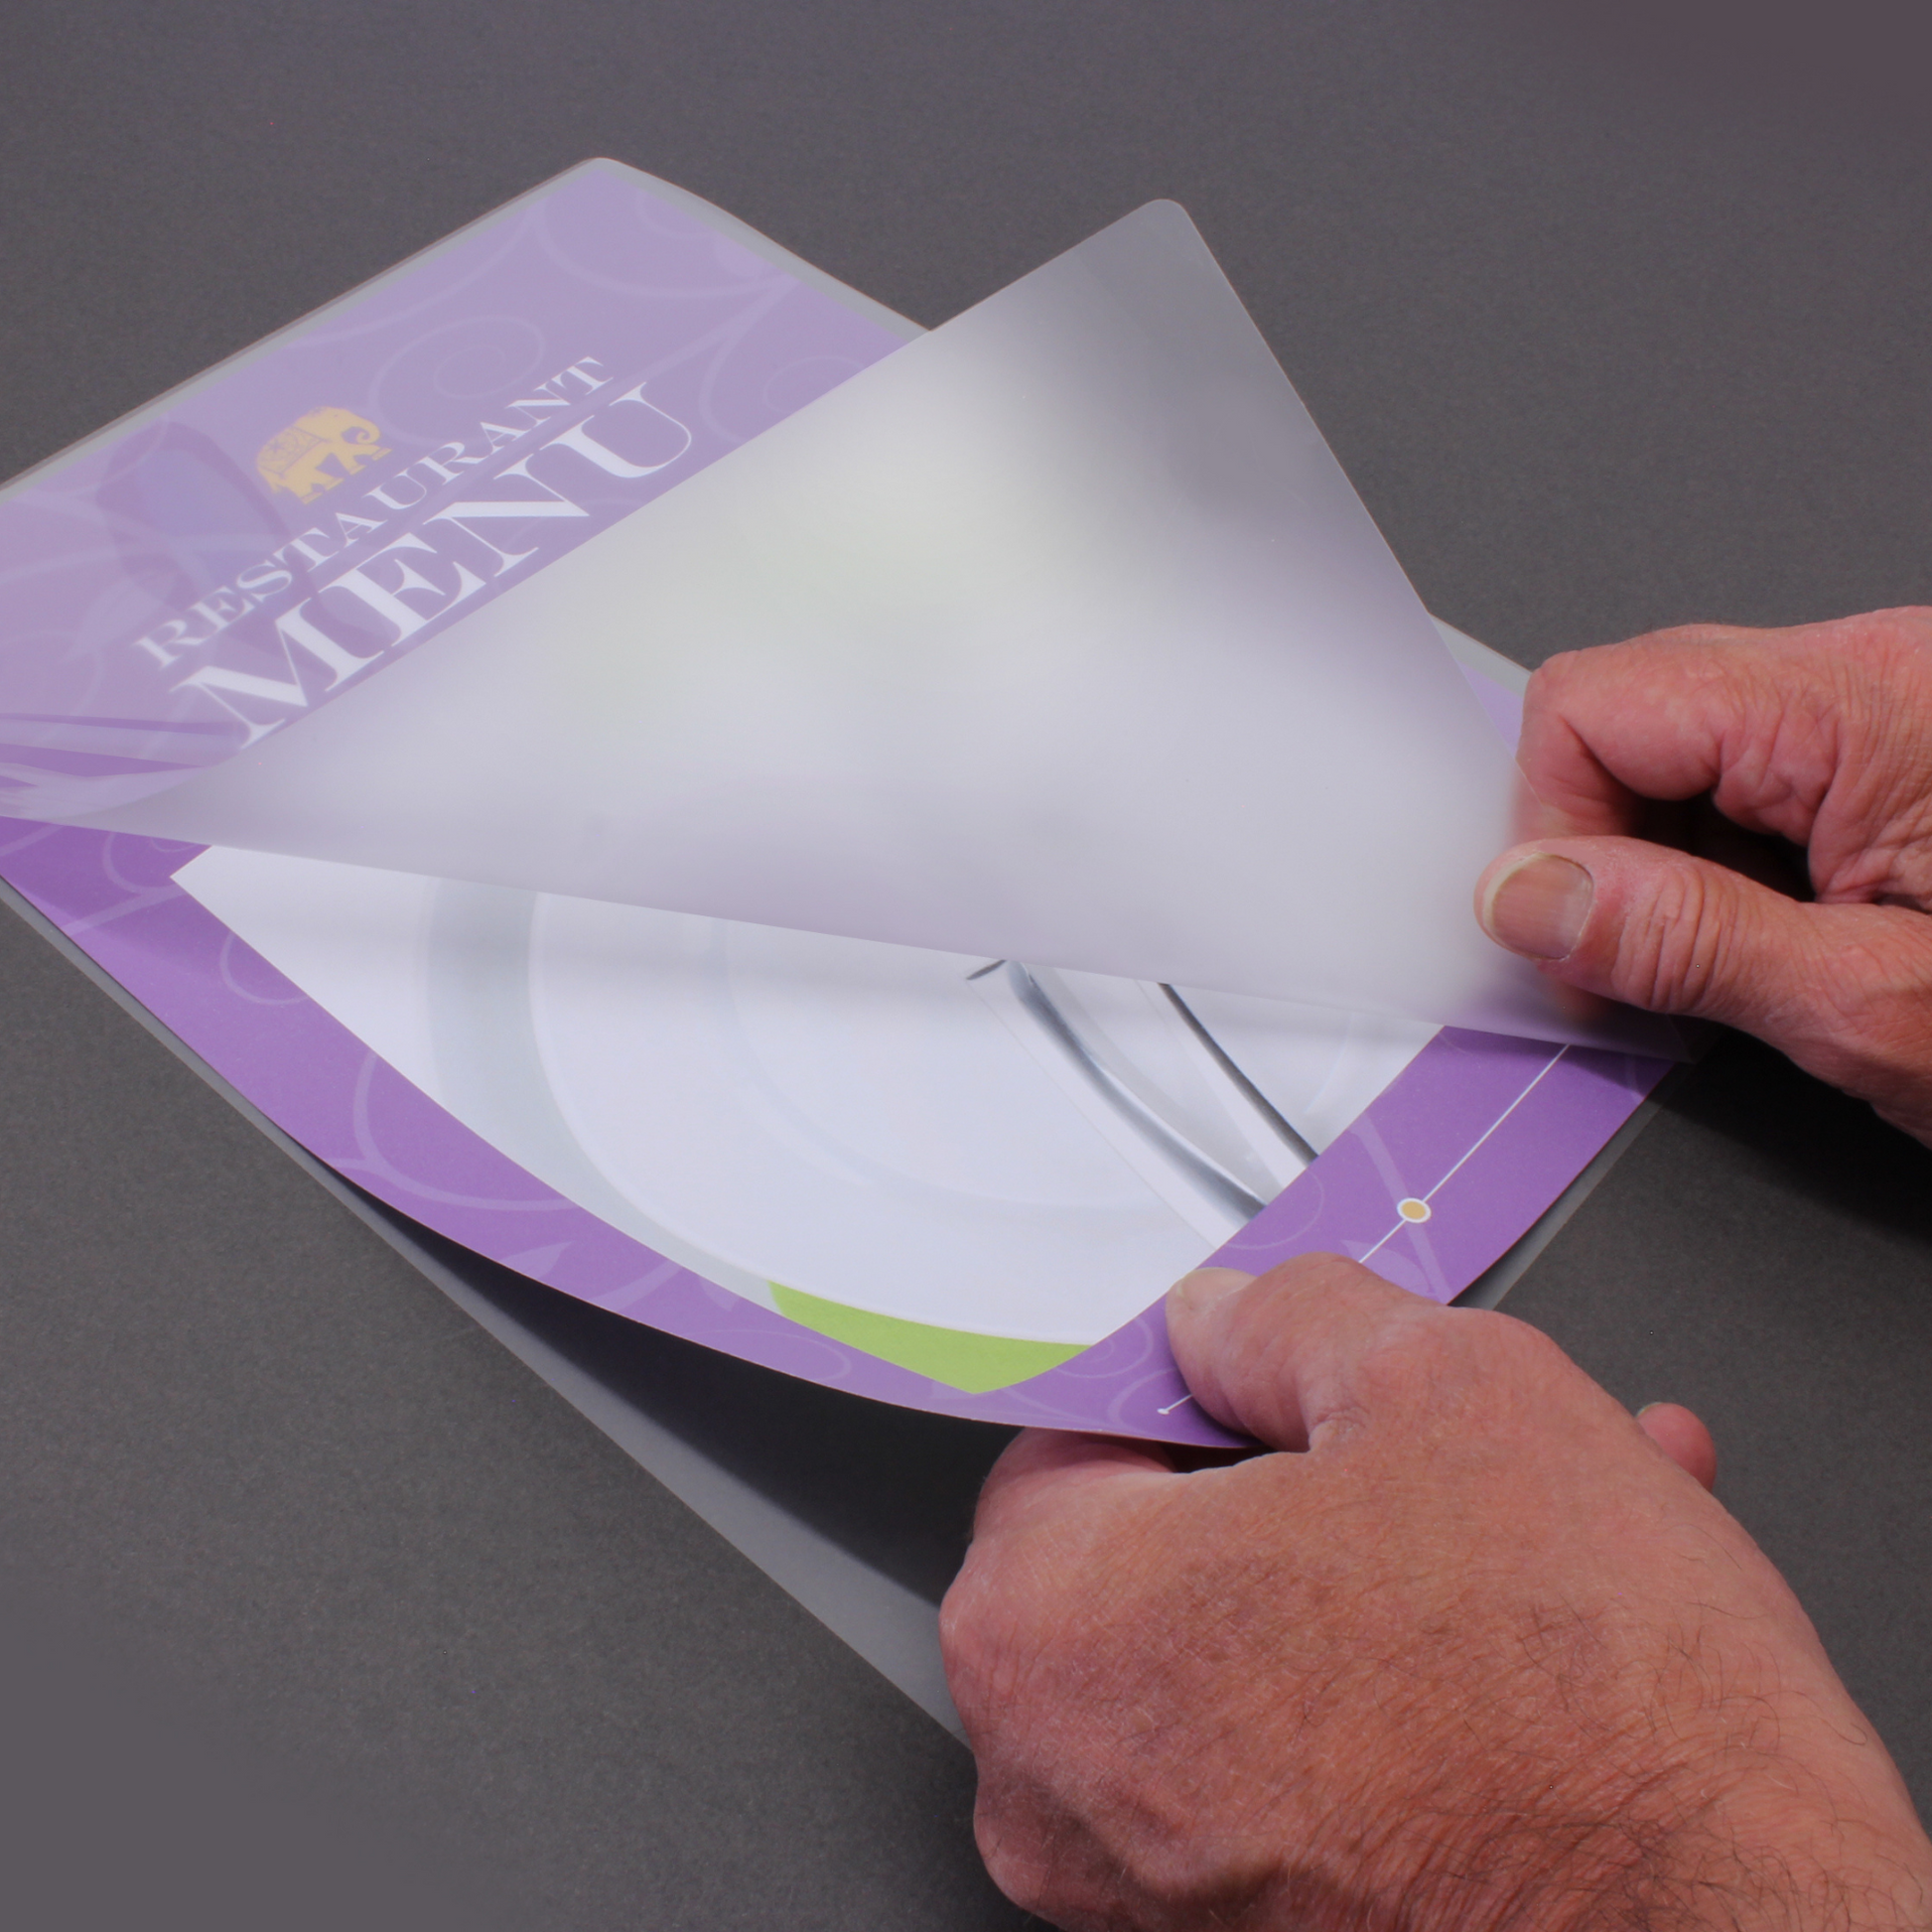 A person's hands peeling open an A3 gloss laminating pouch, 150 micron, with a restaurant menu about to be inserted, depicting the process of preparing items for lamination.